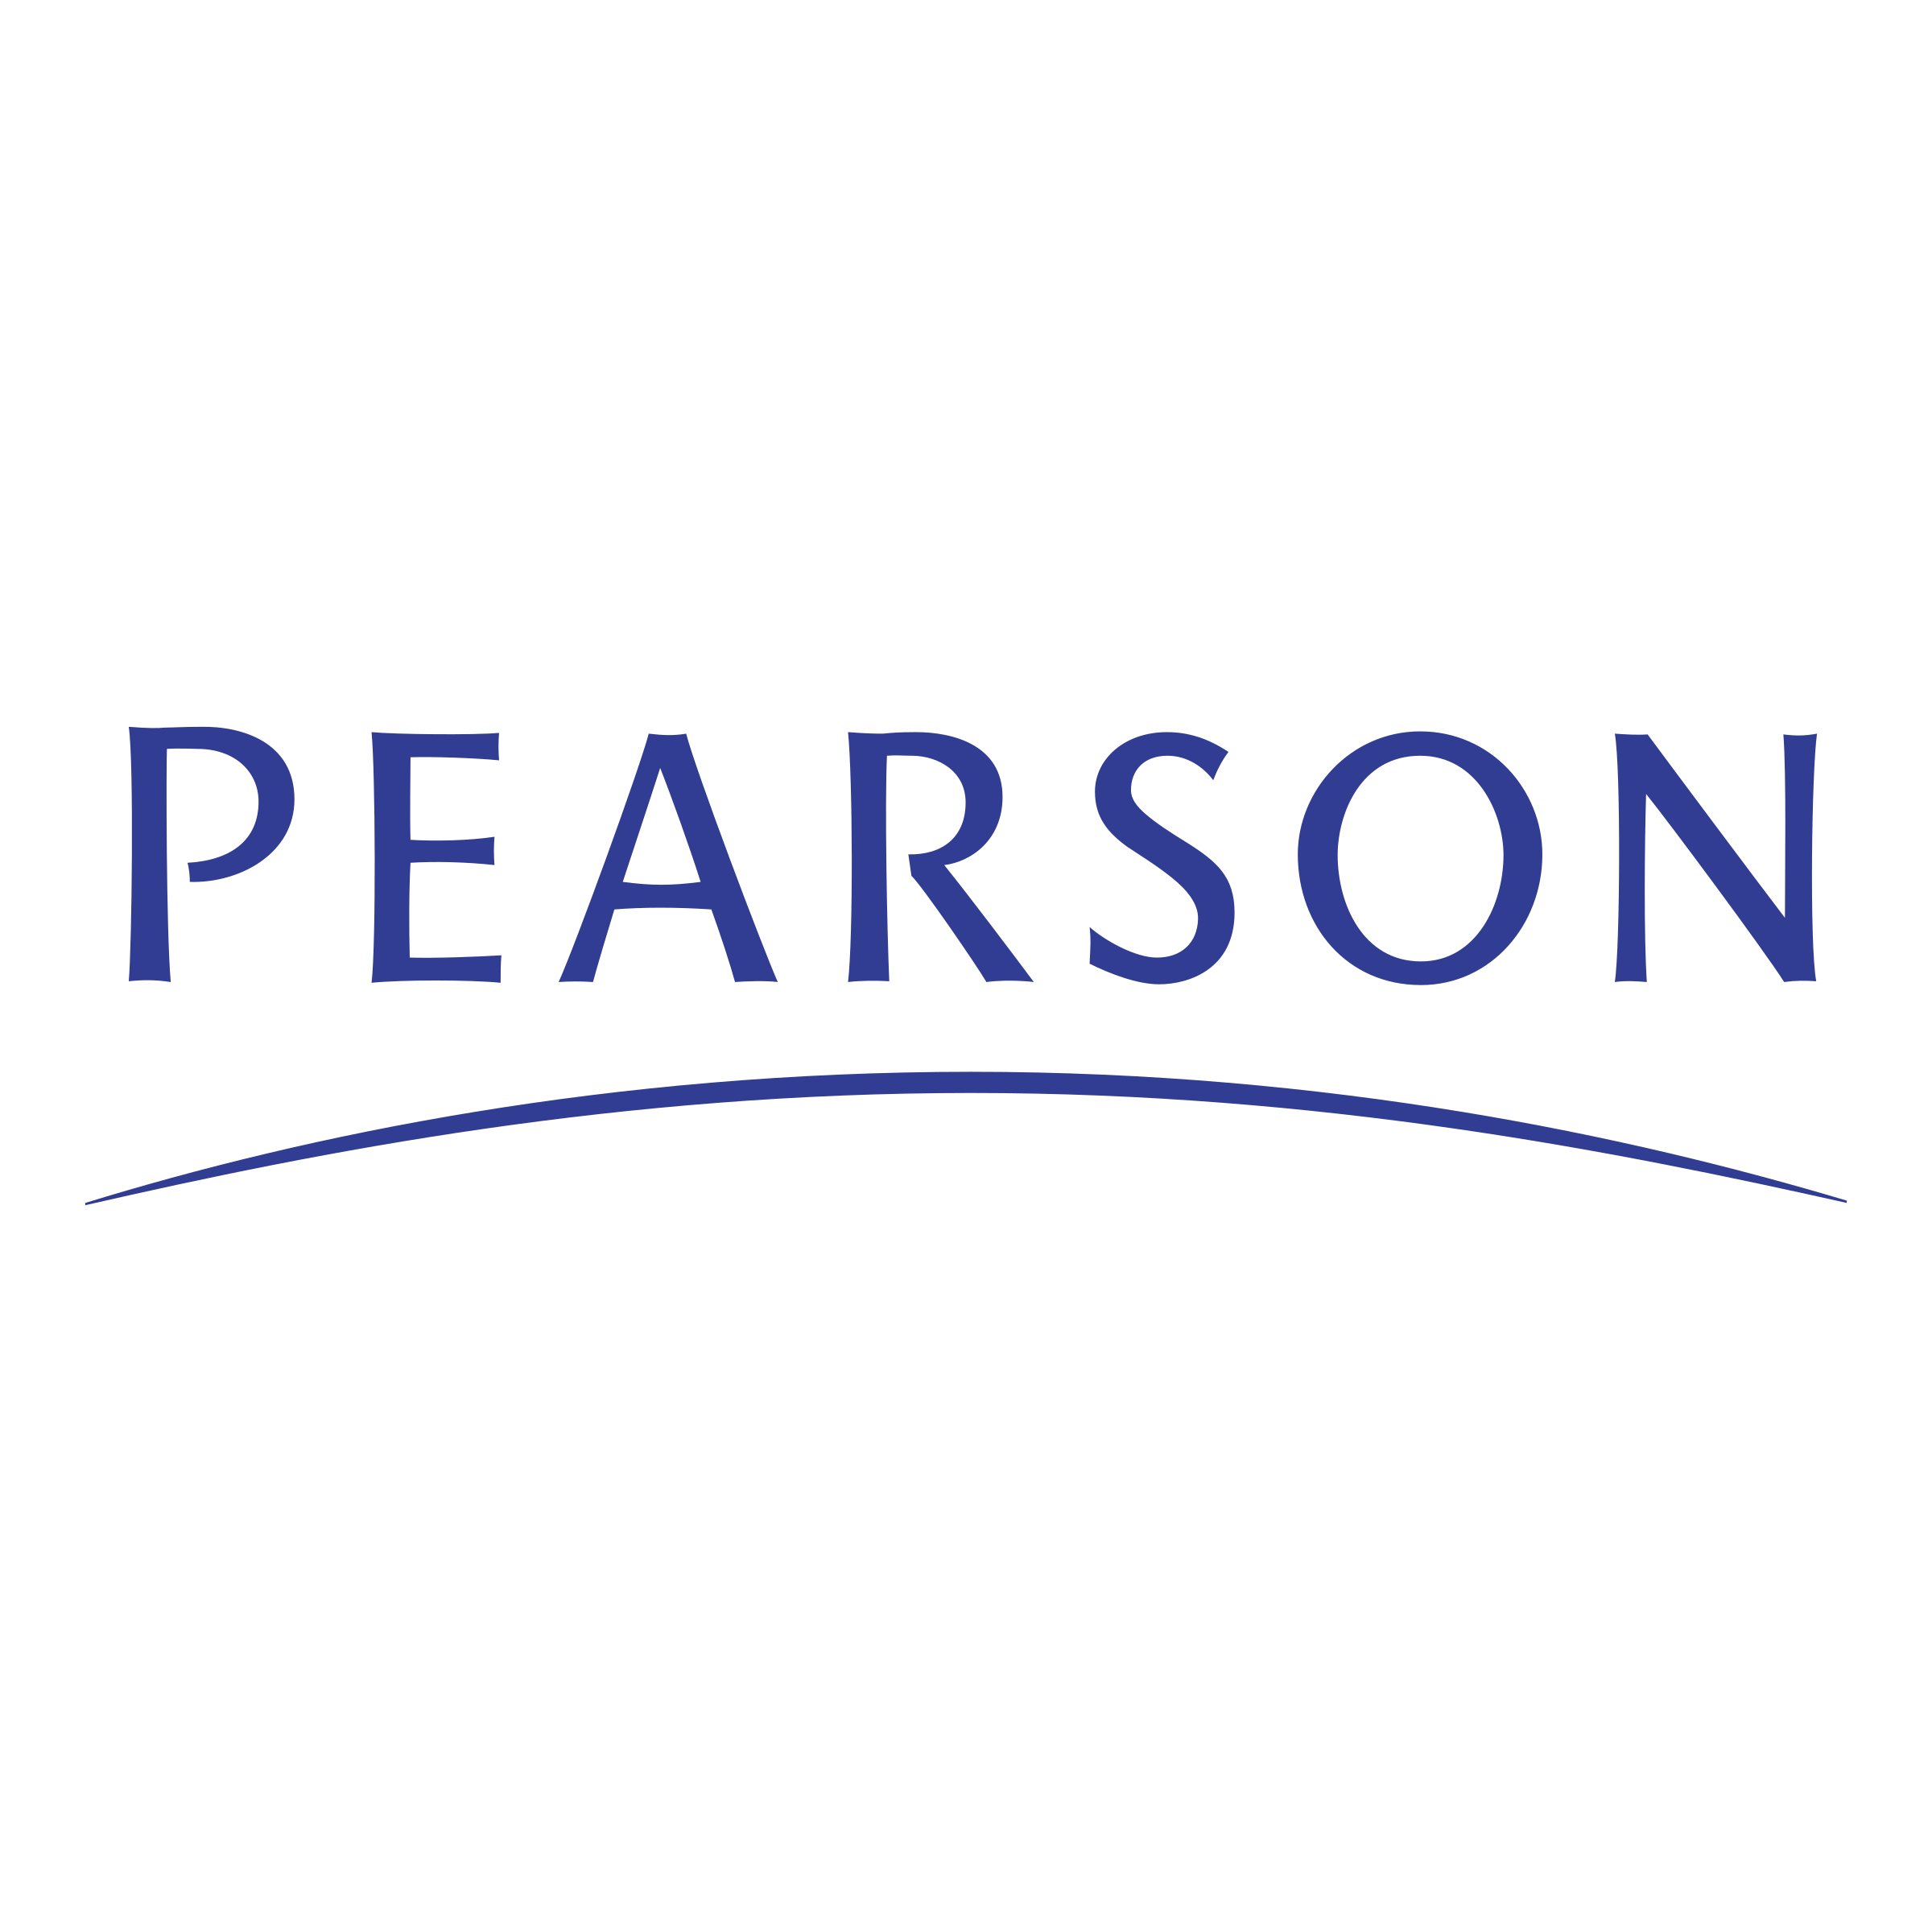 Pearson Logo - Pearson Logo PNG Transparent & SVG Vector - Freebie Supply